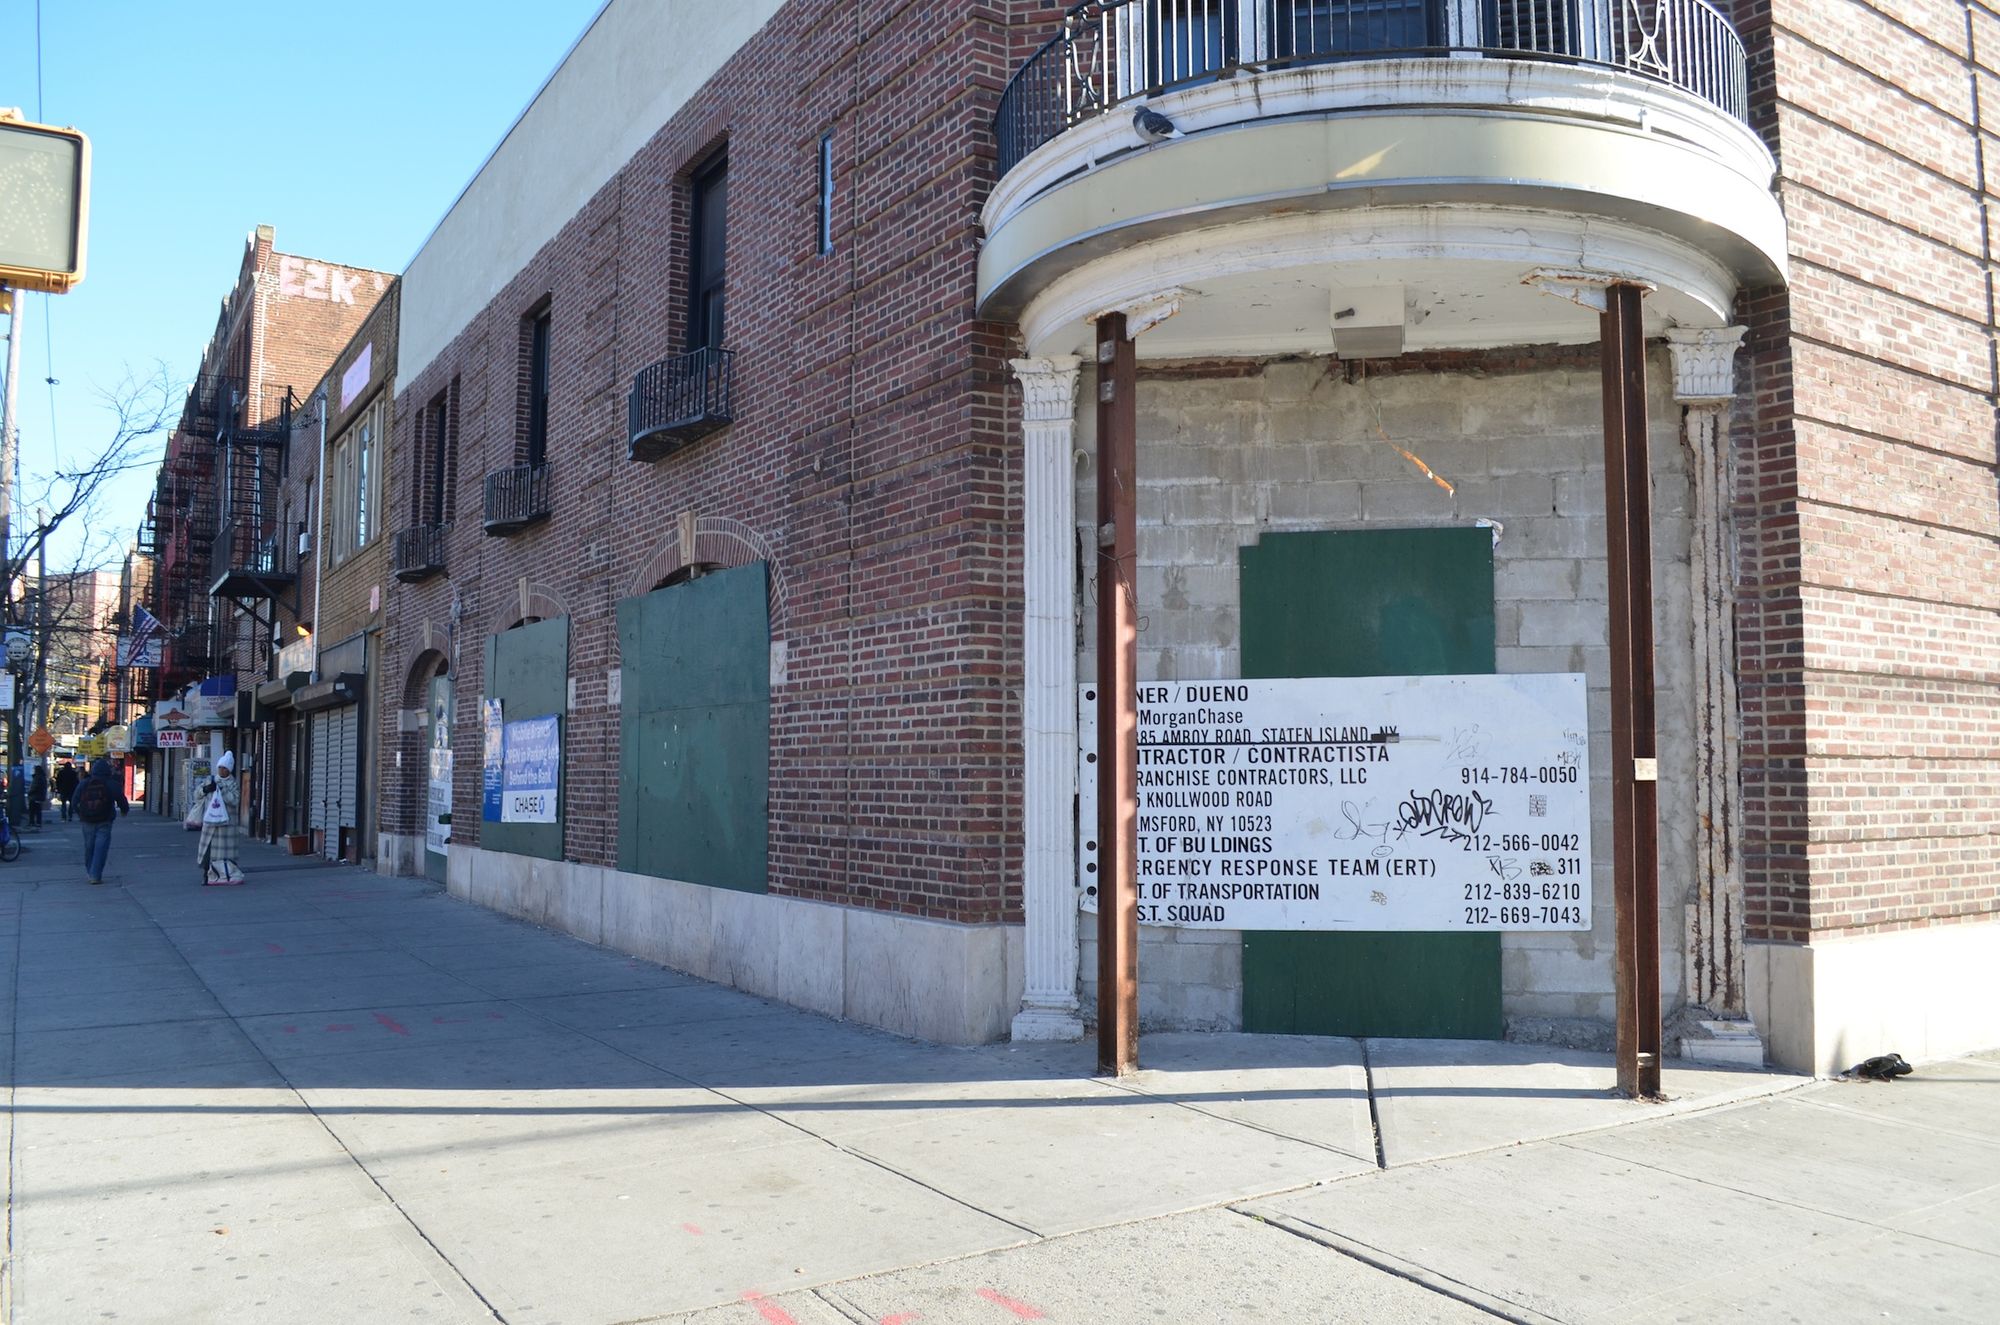 Chase Bank Pulling Out Of Coney Island, Leaving Sandy-Damaged Property To Rot